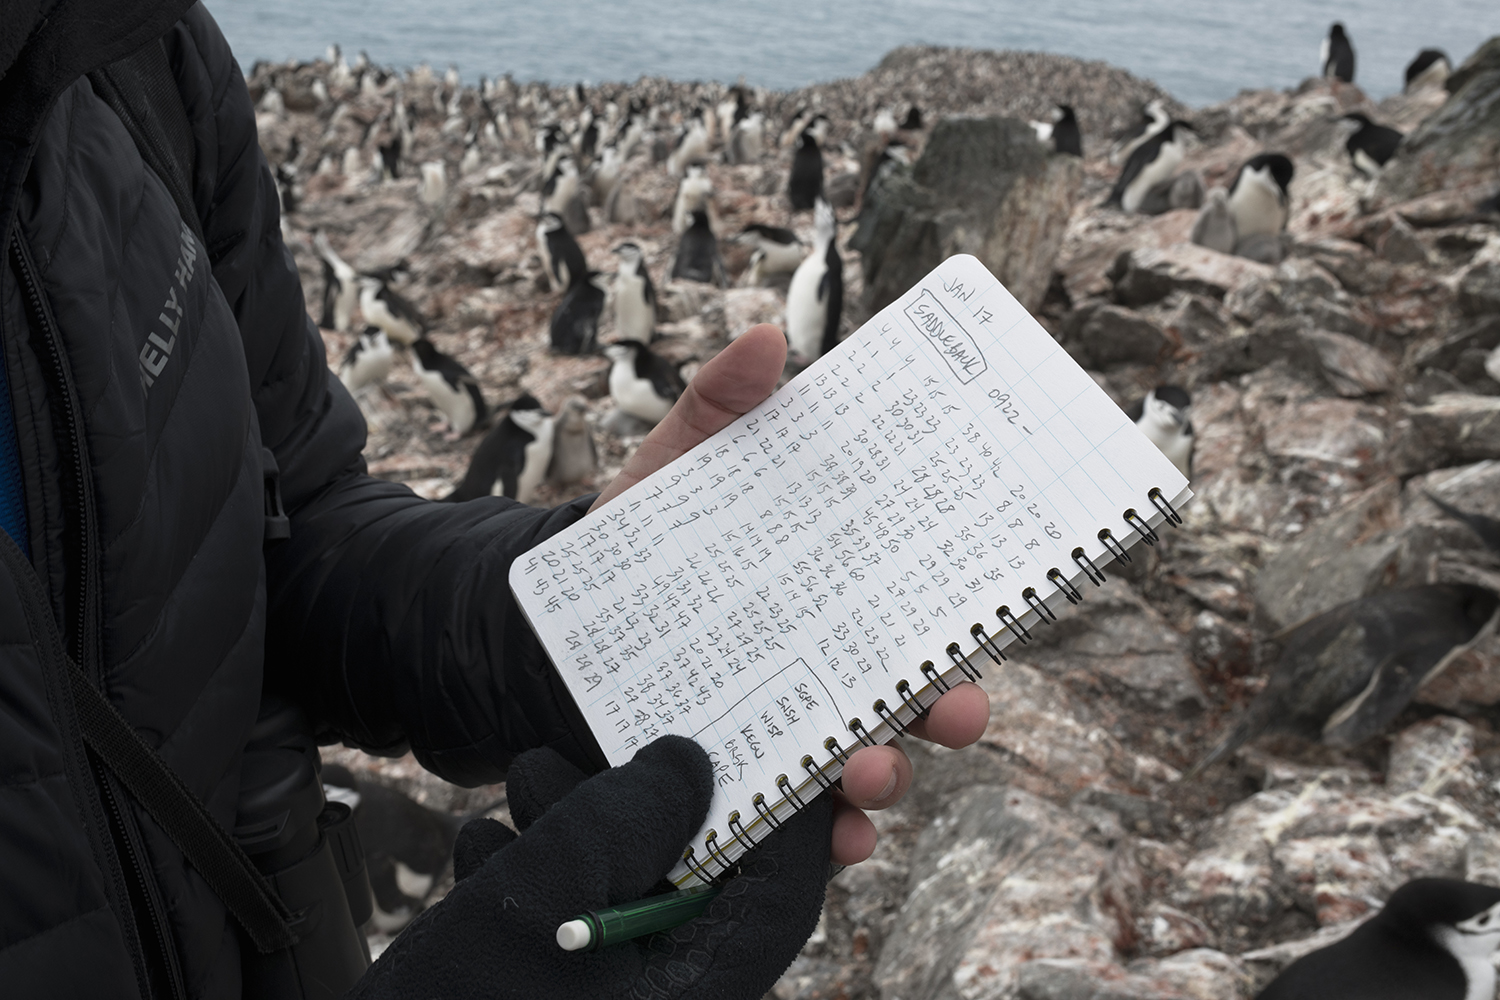 Notepad of penguin scientist Noah Strycker, from Stony Brook University.Elephant Island is home to one of the worldâs largest Chinstrap Penguin populations but the scientists conducting the census finds the number of chinstrap penguins on Elephant Island has dropped almost 60% since the last survey in 1971. Penguins main source of food is krill and the warming waters have reduced the sea ice and the phytoplankton that krill depend upon.